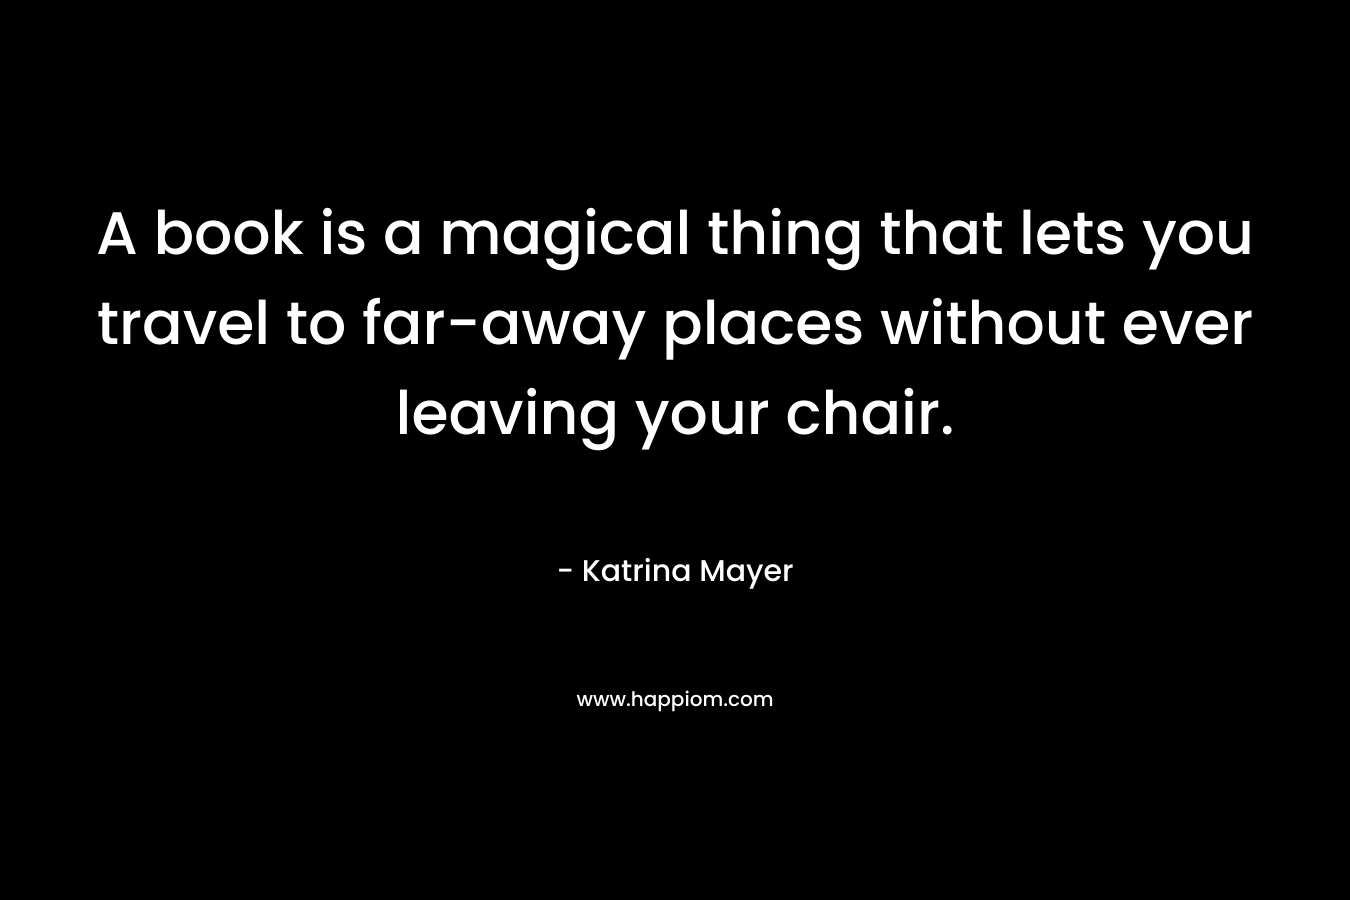 A book is a magical thing that lets you travel to far-away places without ever leaving your chair. – Katrina Mayer